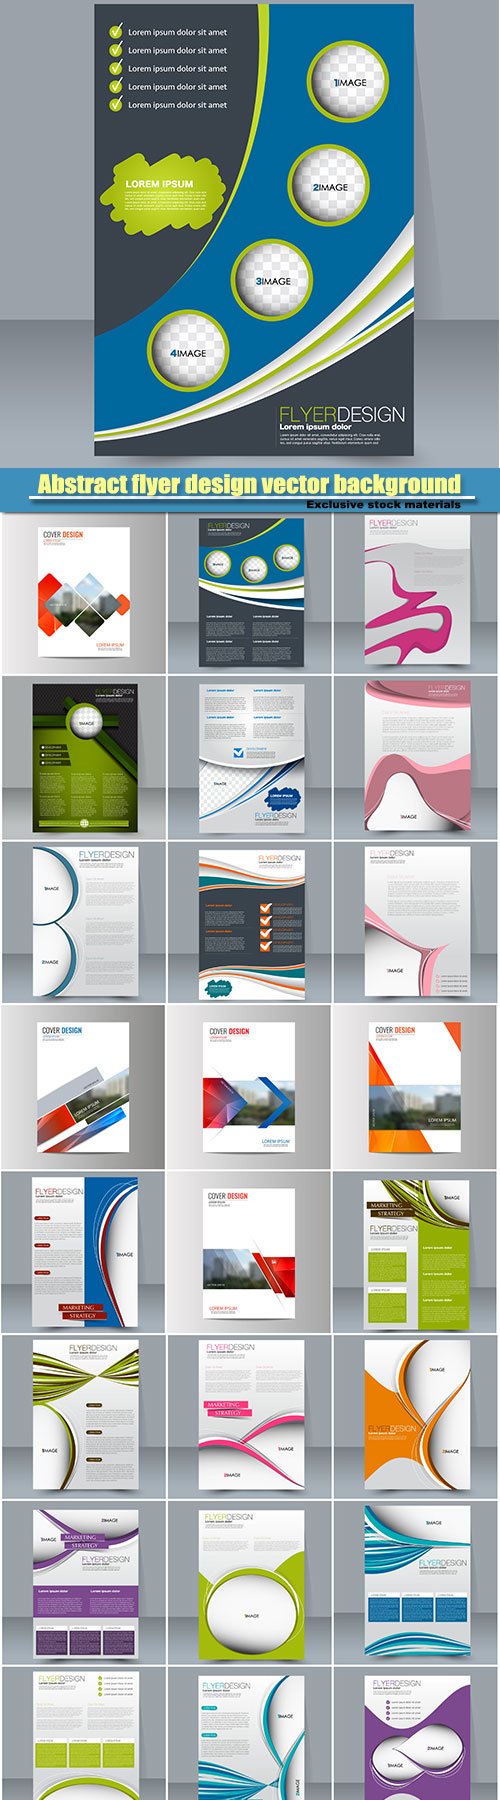 Abstract vector flyer design background, brochure template, magazine cover